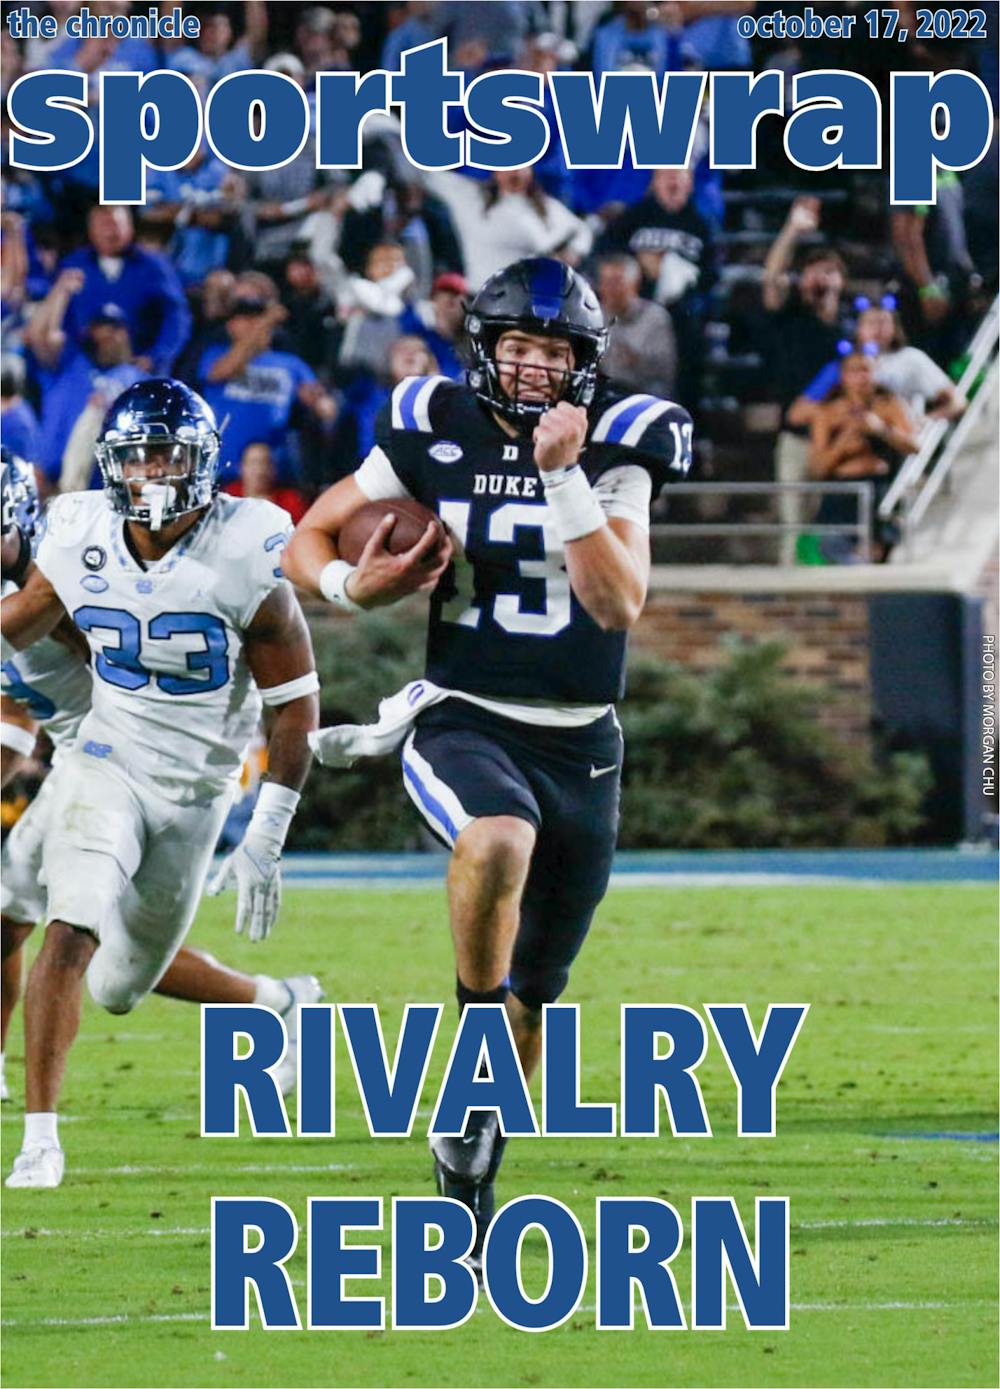 Duke football's thrilling loss to North Carolina headlined yet another busy week in Duke athletics.